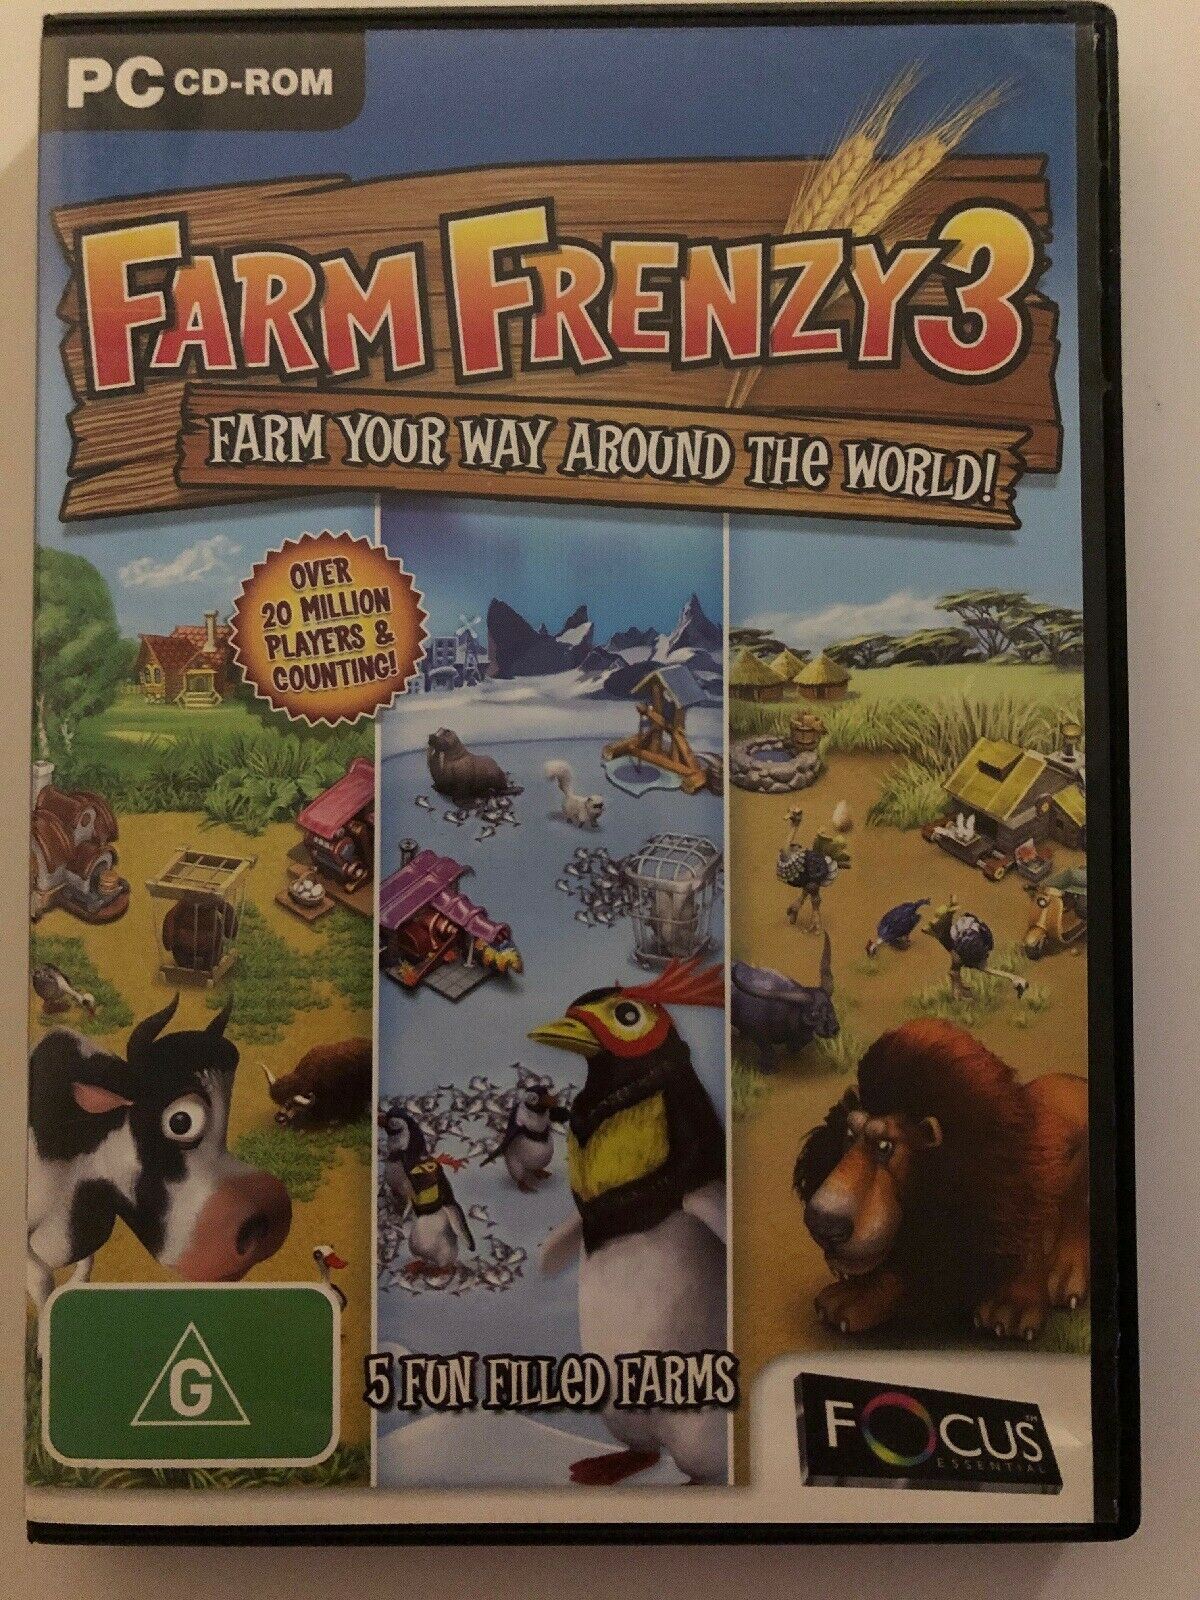 Farm Frenzy 3 PC Video Game Farm management simulation strategy game for Windows